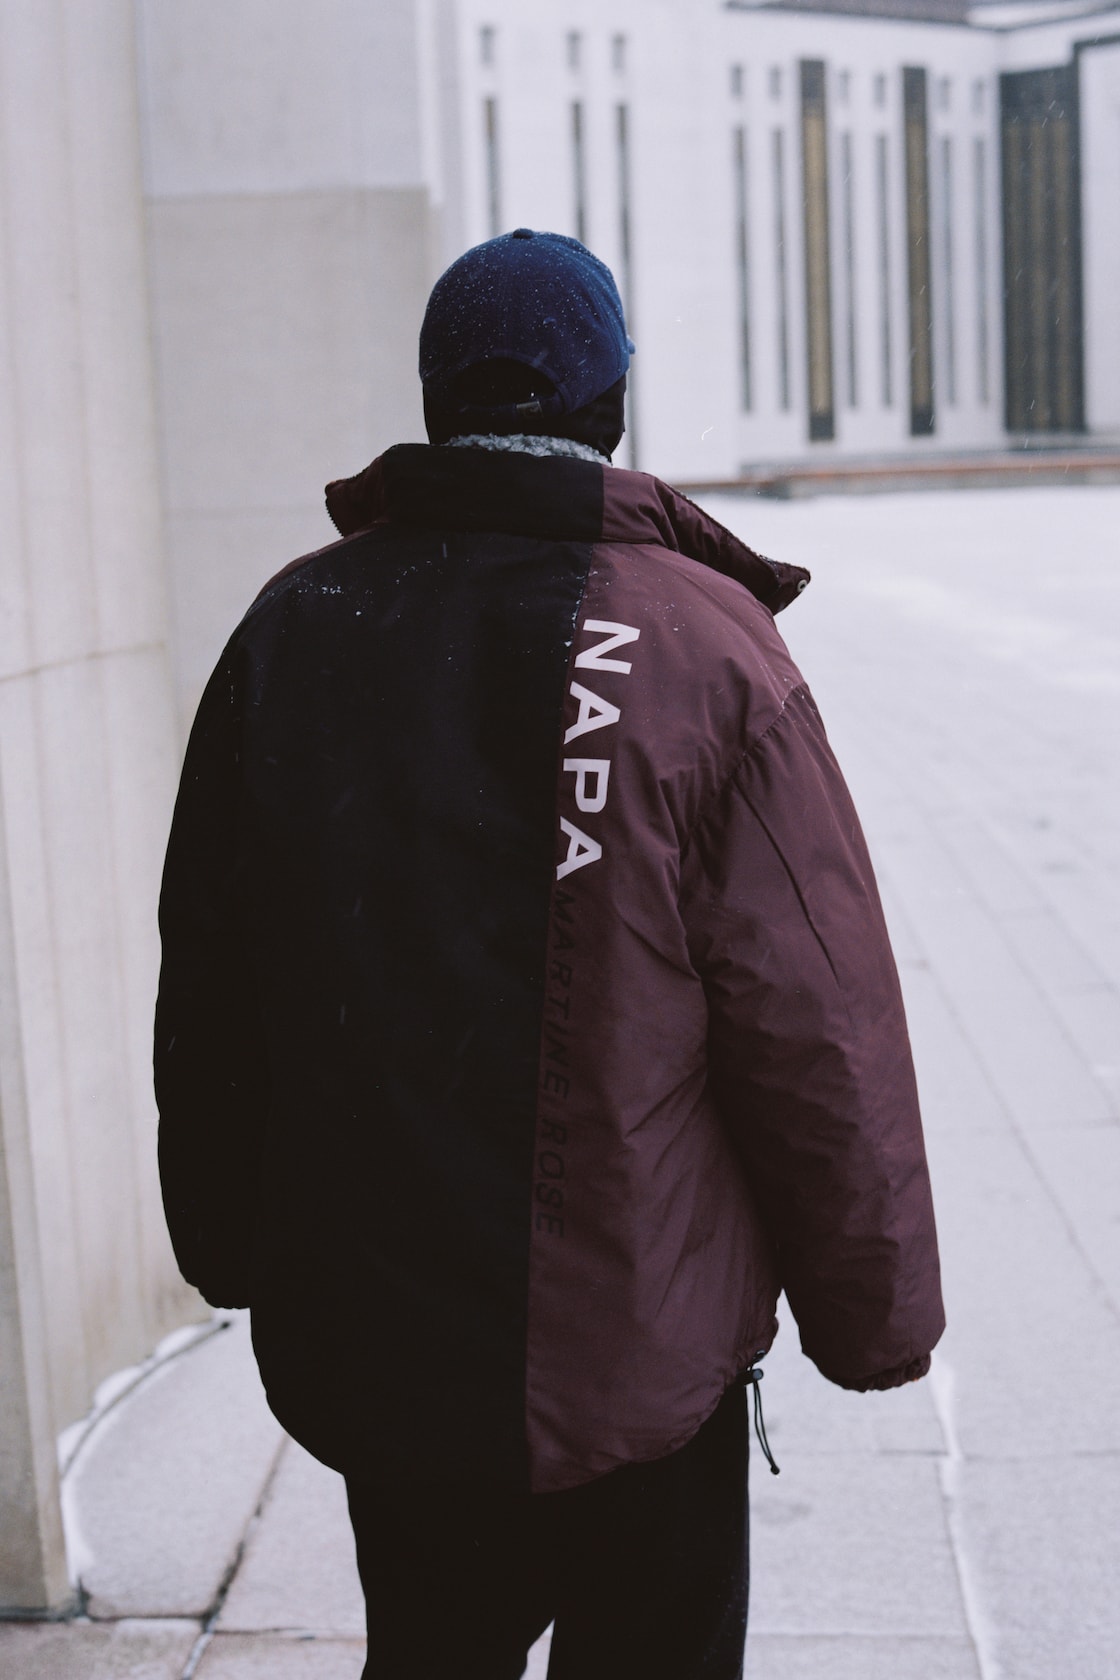 Napa by Martine Rose KM20 Moscow Editorial Outerwear Jacket Shoot 